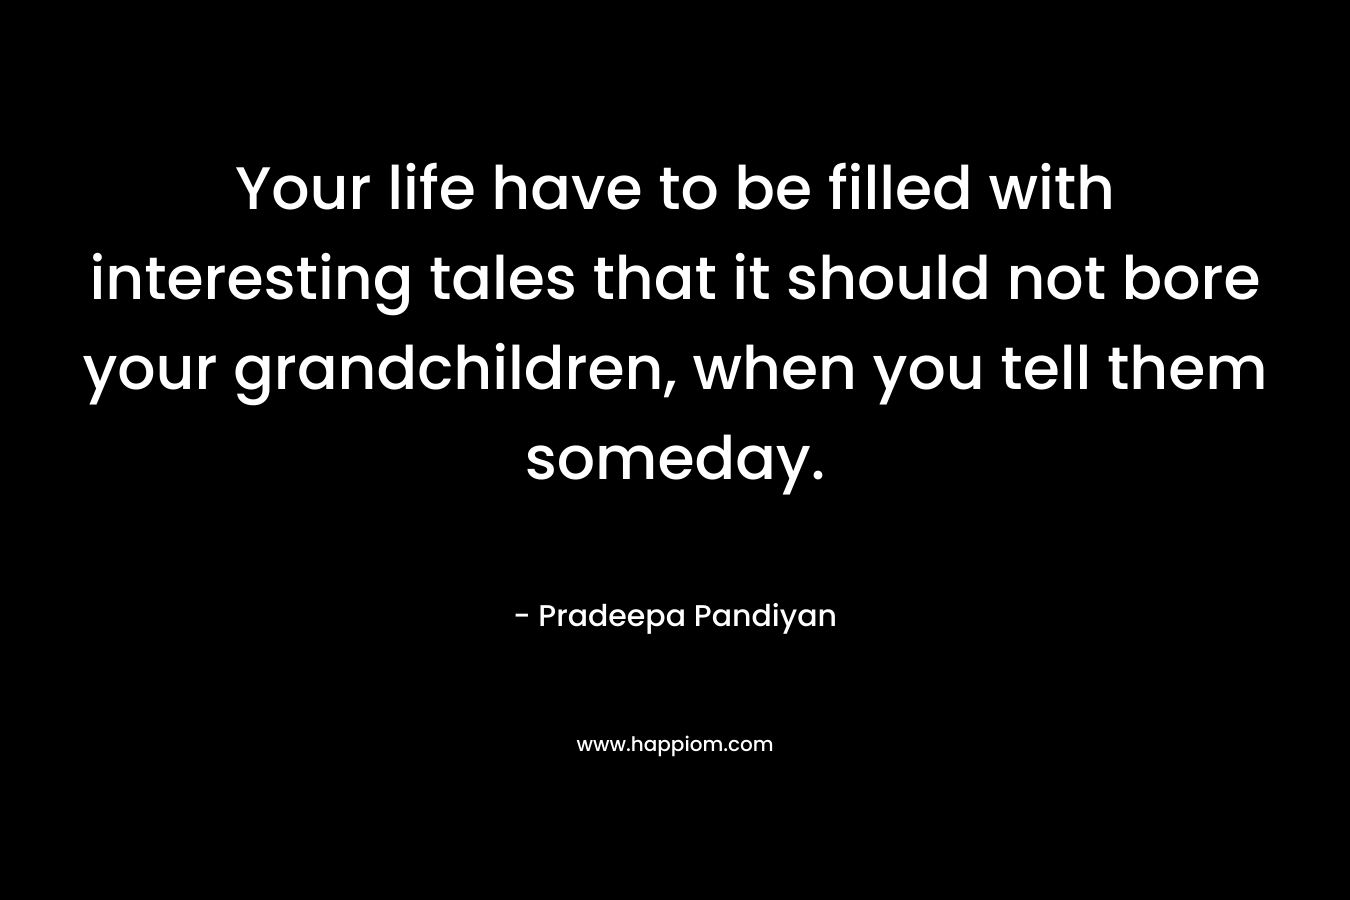 Your life have to be filled with interesting tales that it should not bore your grandchildren, when you tell them someday. – Pradeepa Pandiyan